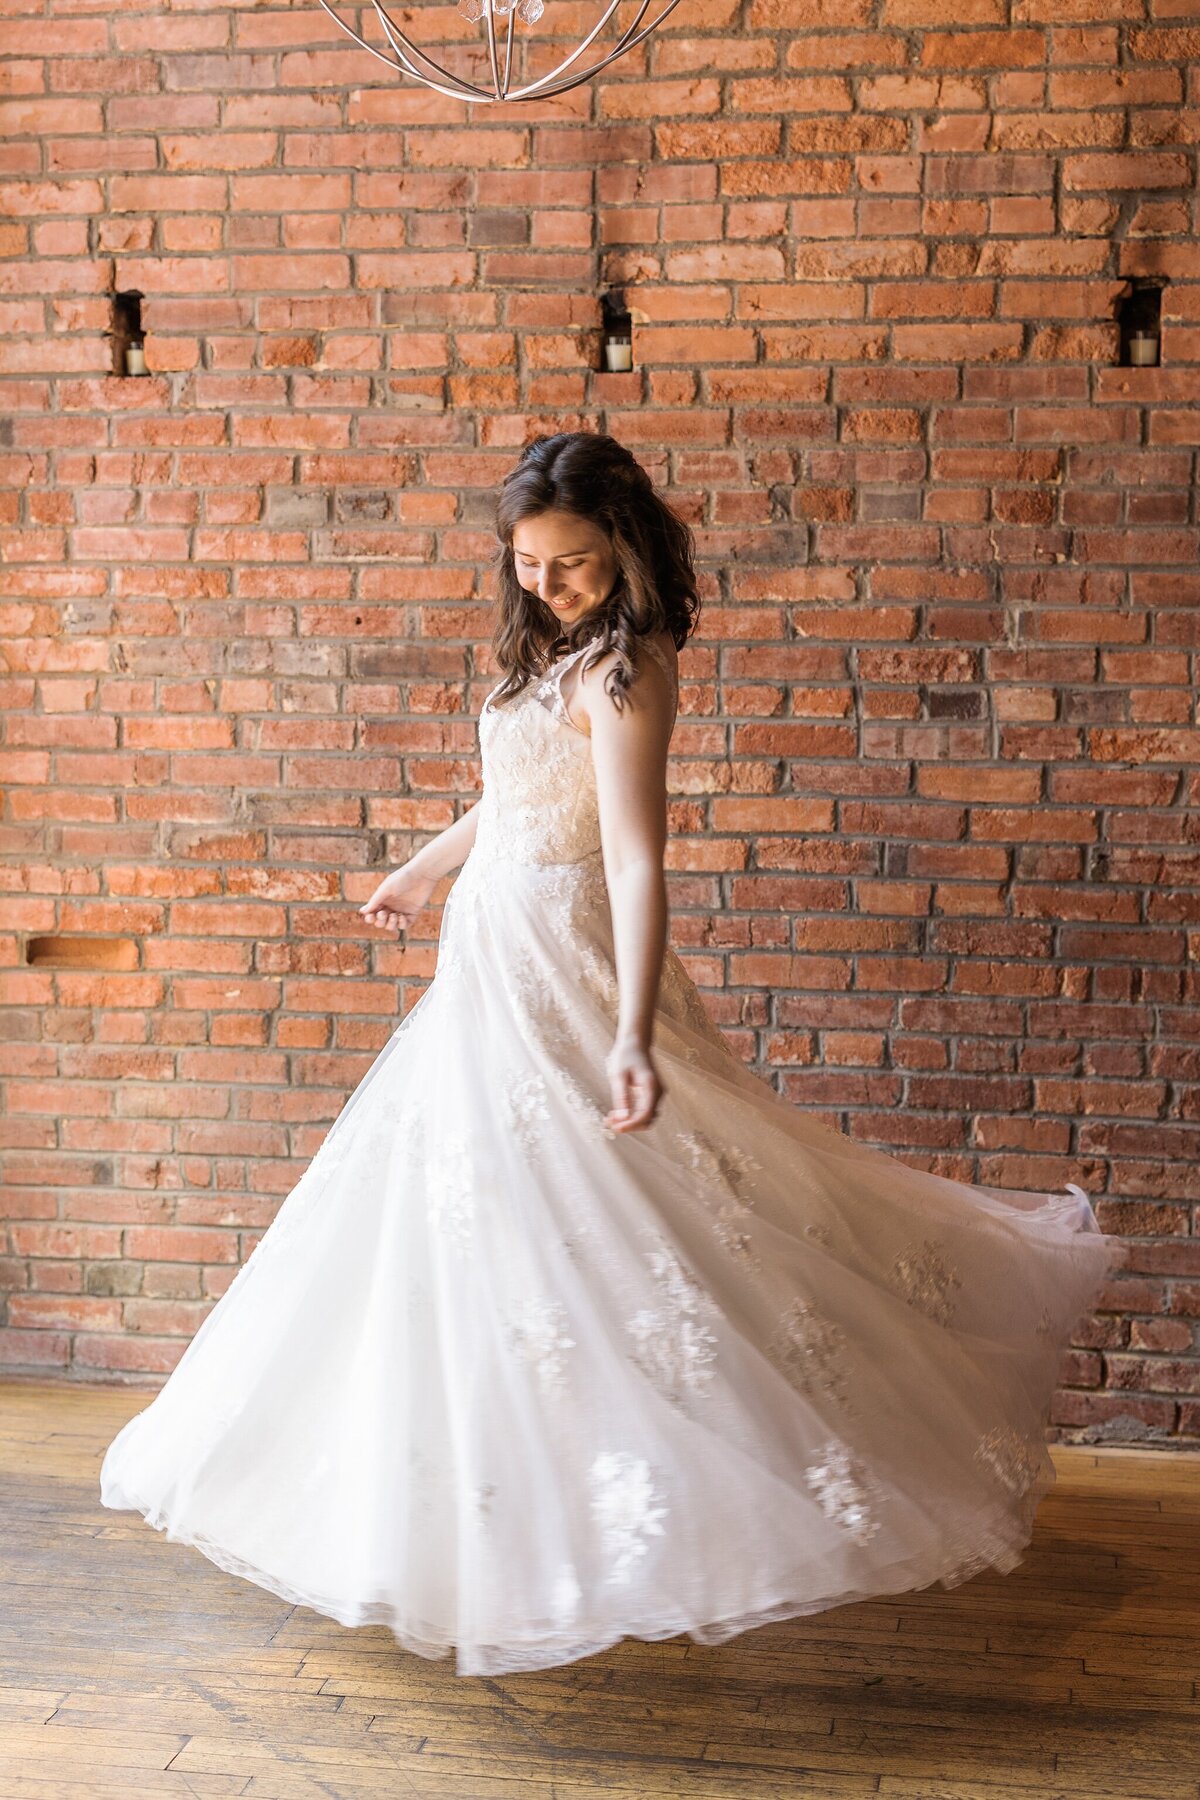 Portrait of a bride twirling her wedding dress on her wedding day in Plano, Texas. The bride is wearing a long flowing, detailed, white dress and twirls in front of an antique brick wall.